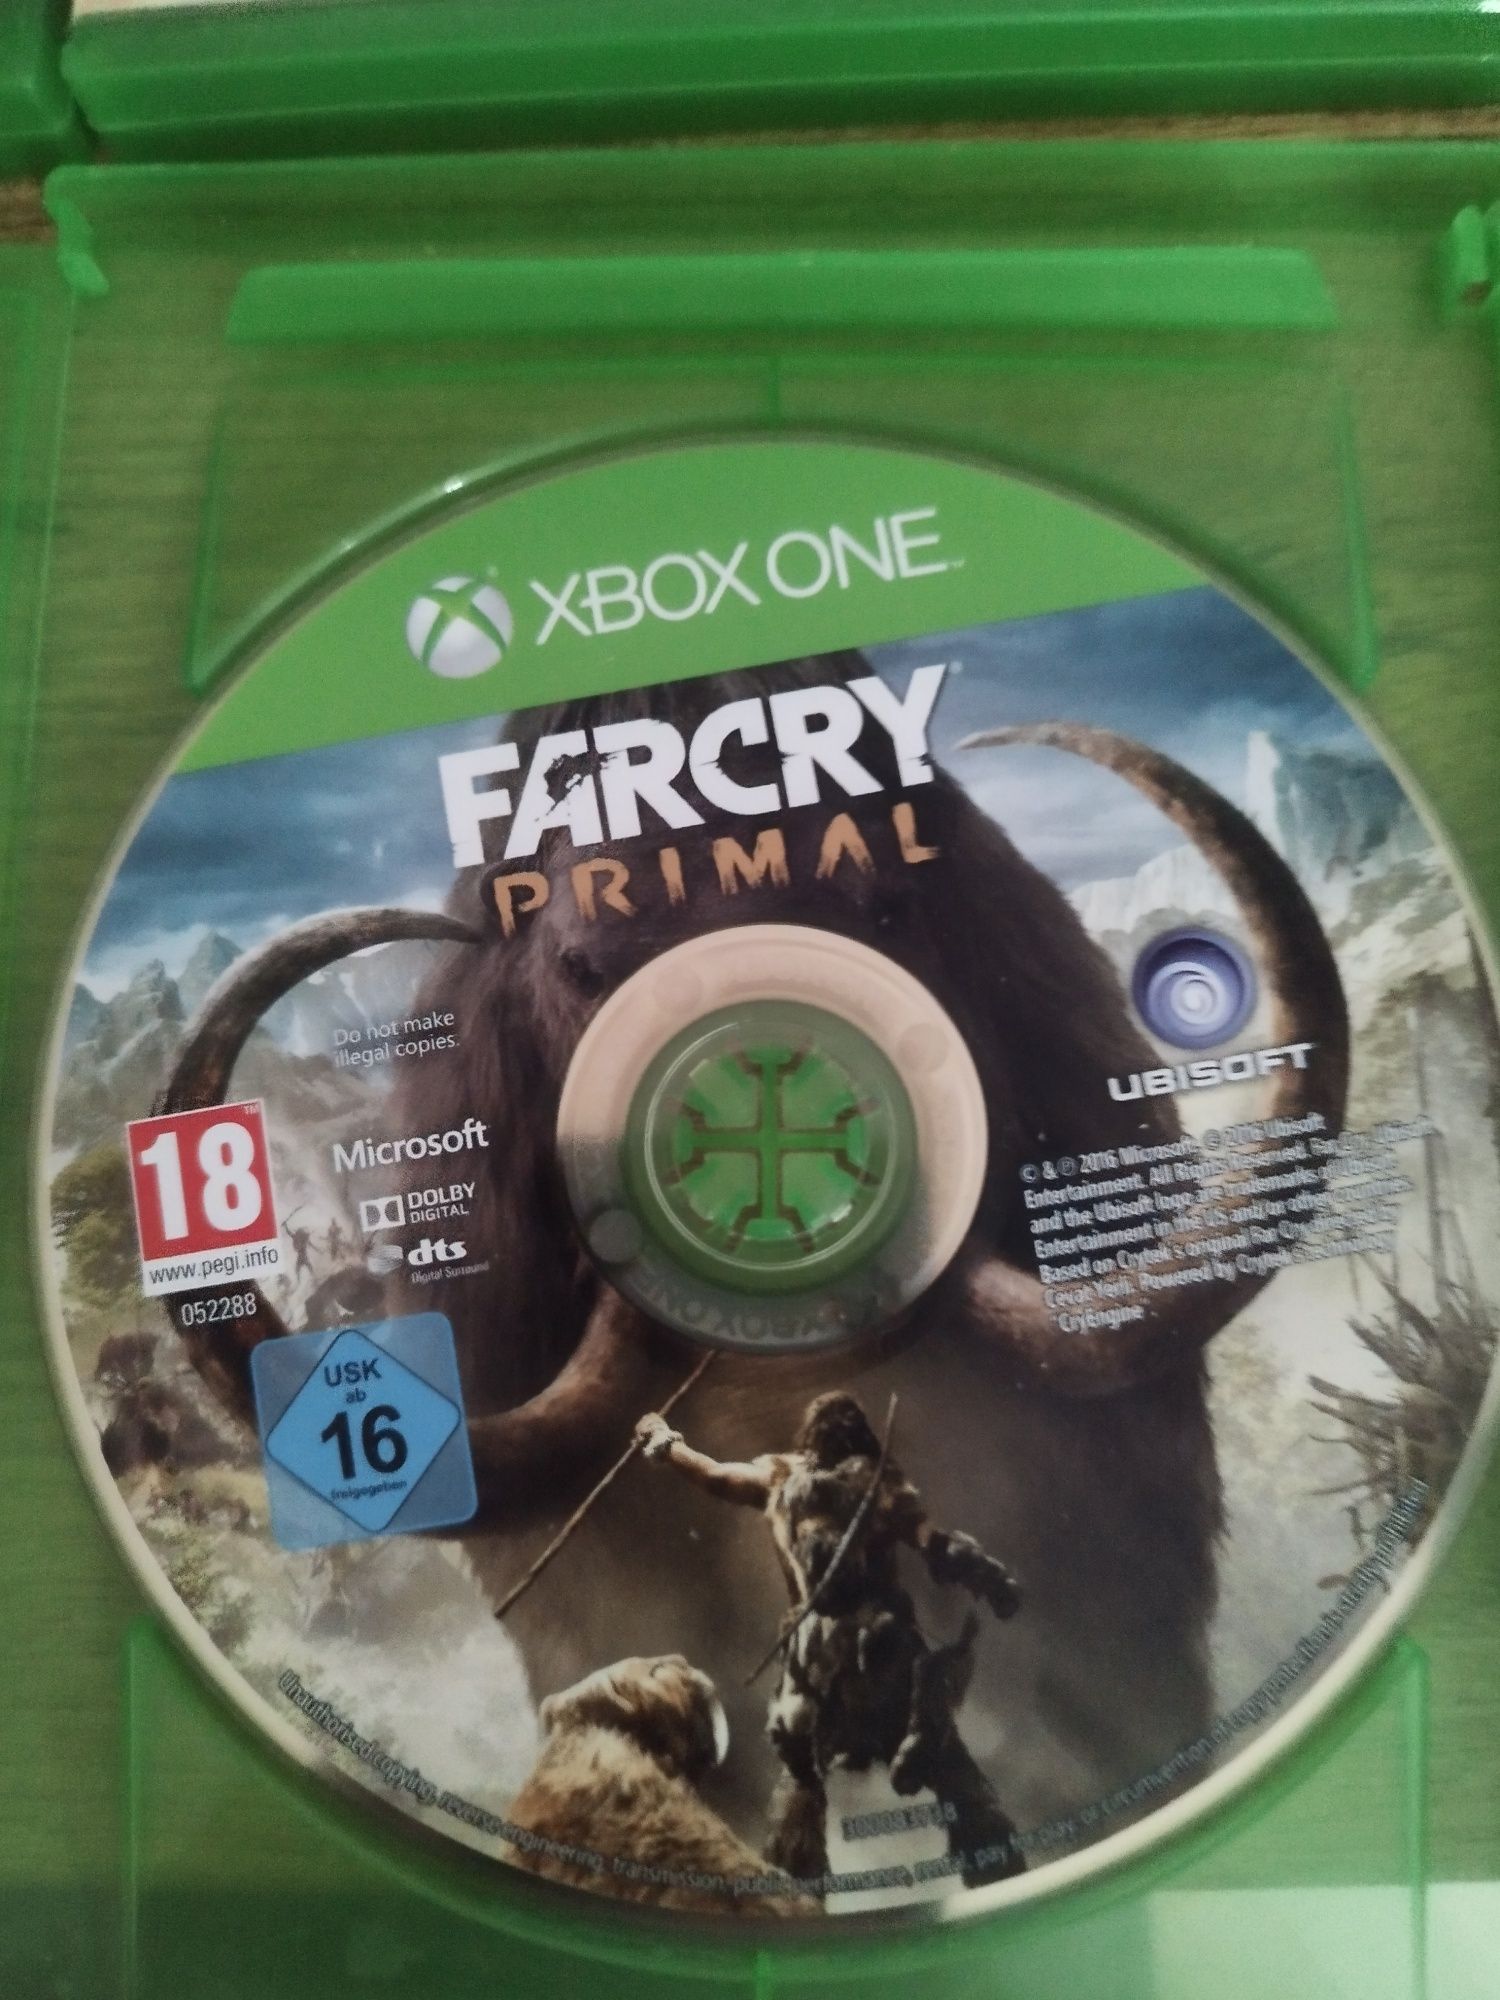 Farcry primal xbox one series x